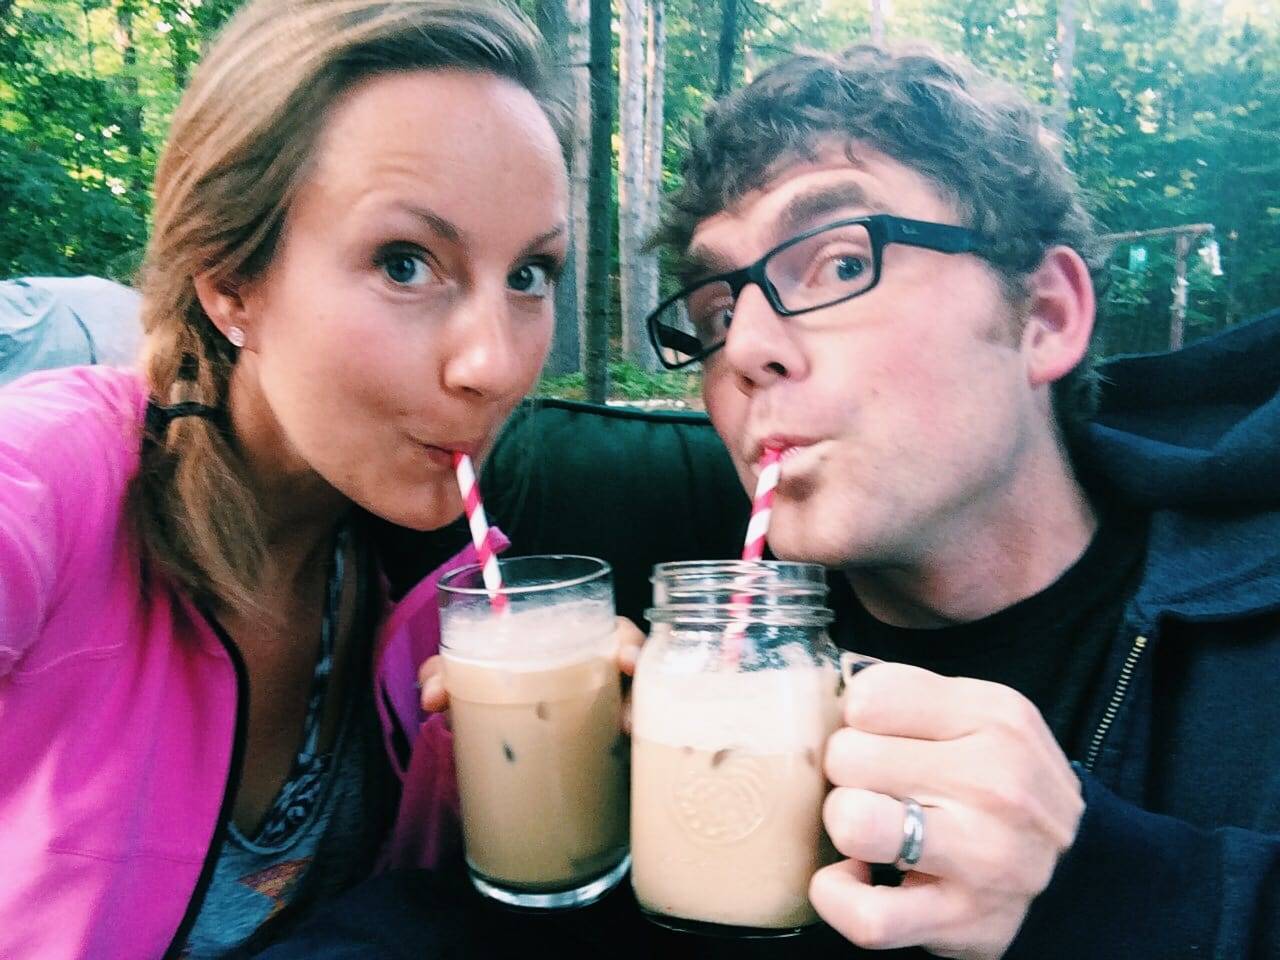 Man and woman drinking iced coffee.